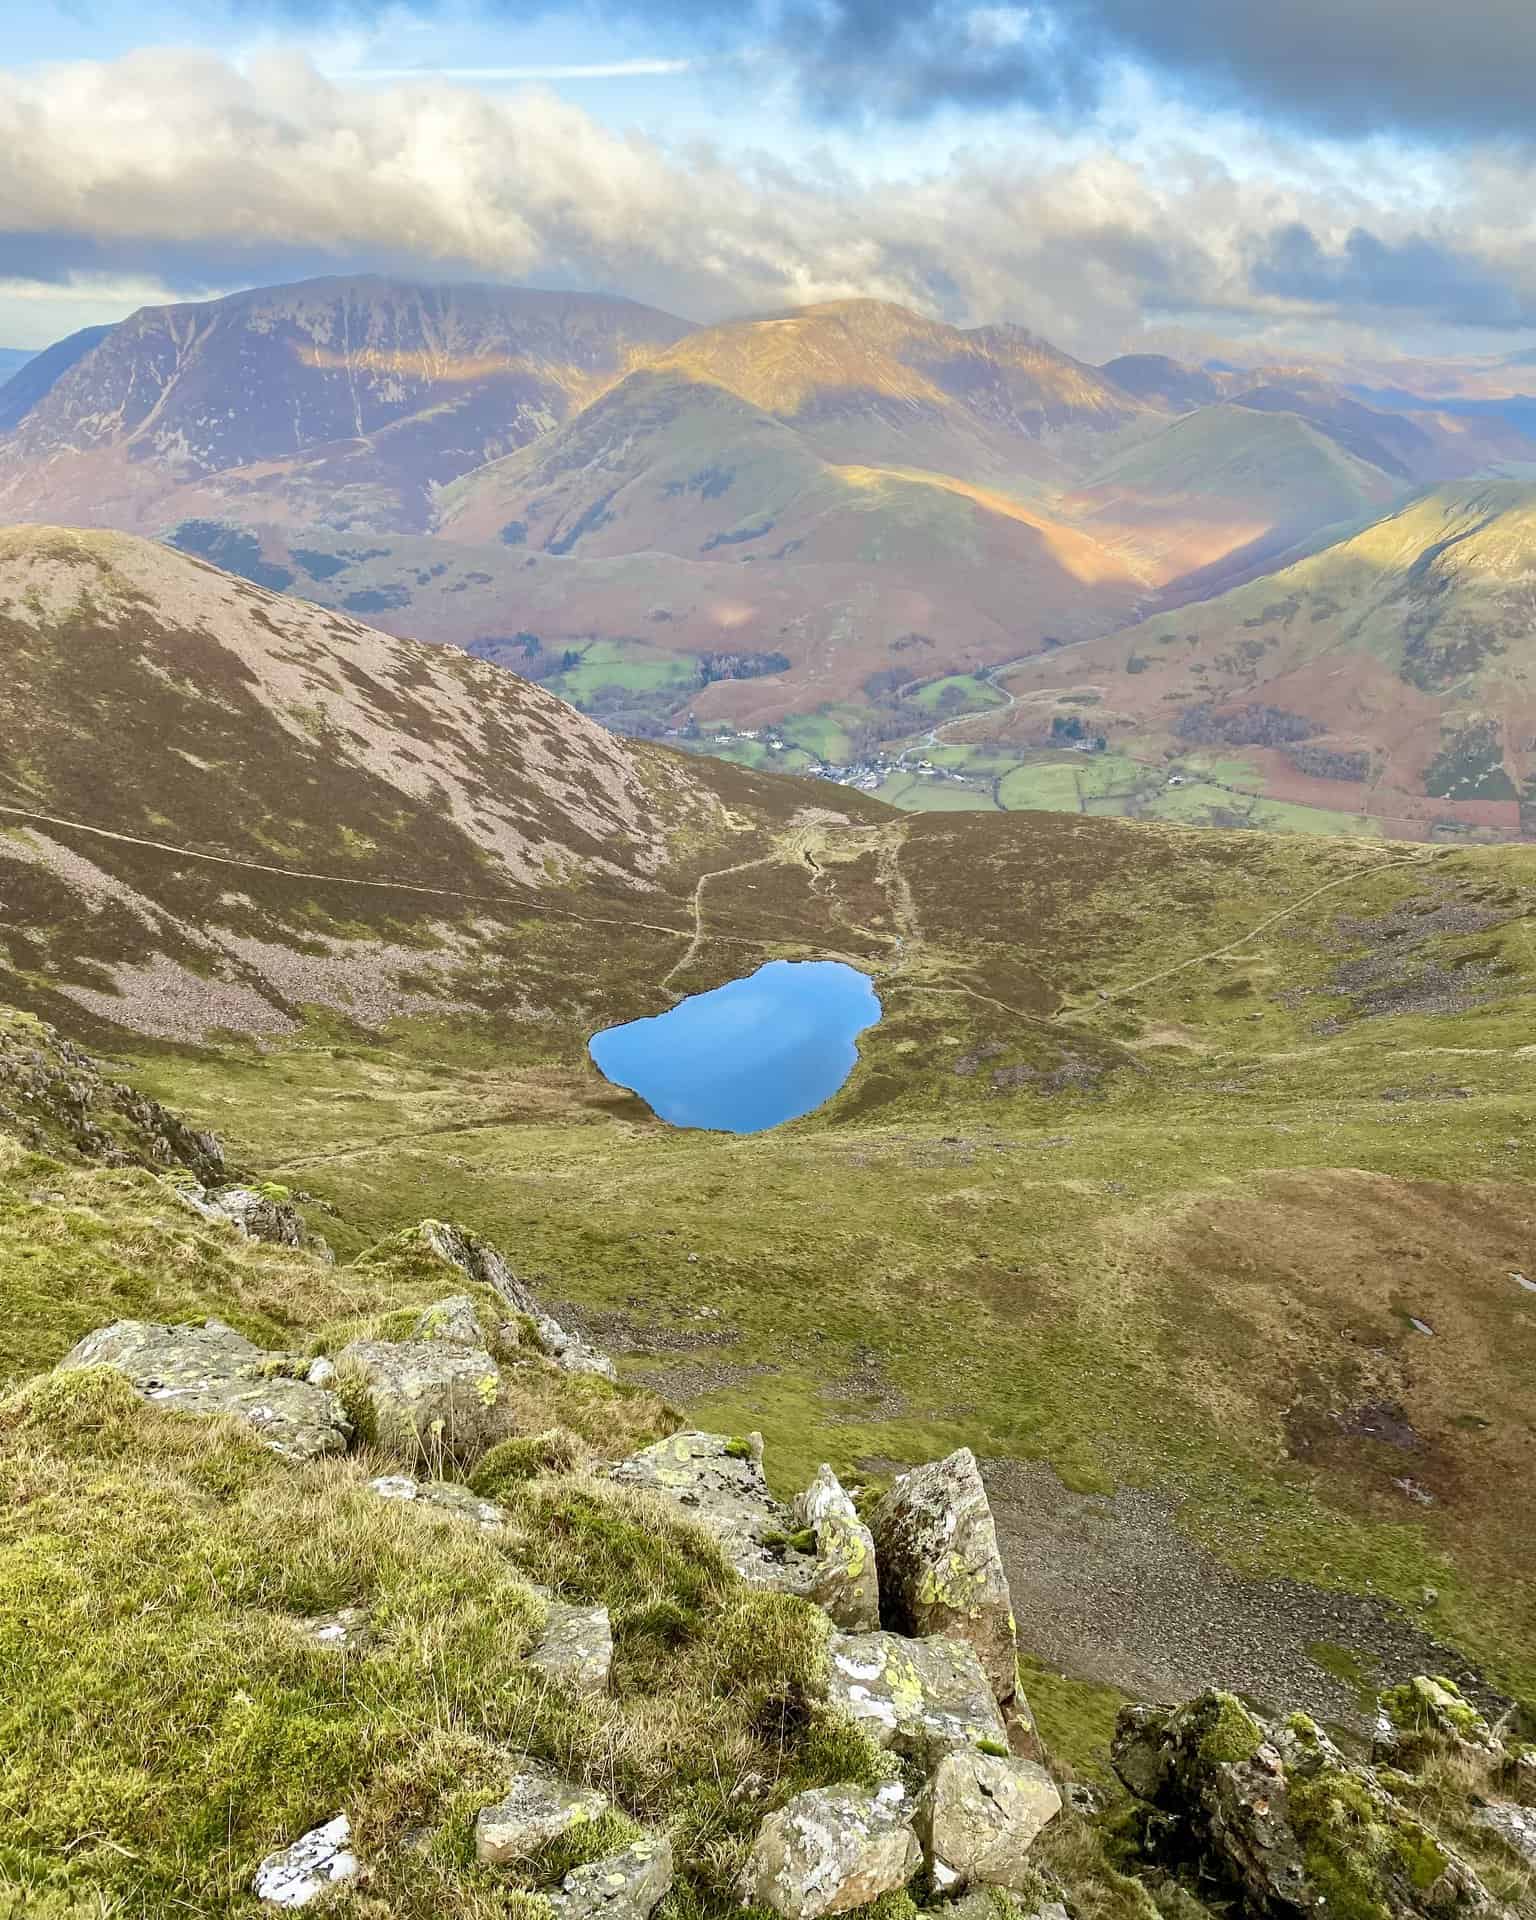 Spectacular vistas from above Chapel Crags. Bleaberry Tarn down below, and the village of Buttermere in the valley. Stretching out behind Buttermere is the mountain range comprising Whiteless Pike, Wandhope, Crag Hill and Sail. The largely brown-coloured mountain on the left-hand side is Grasmoor.